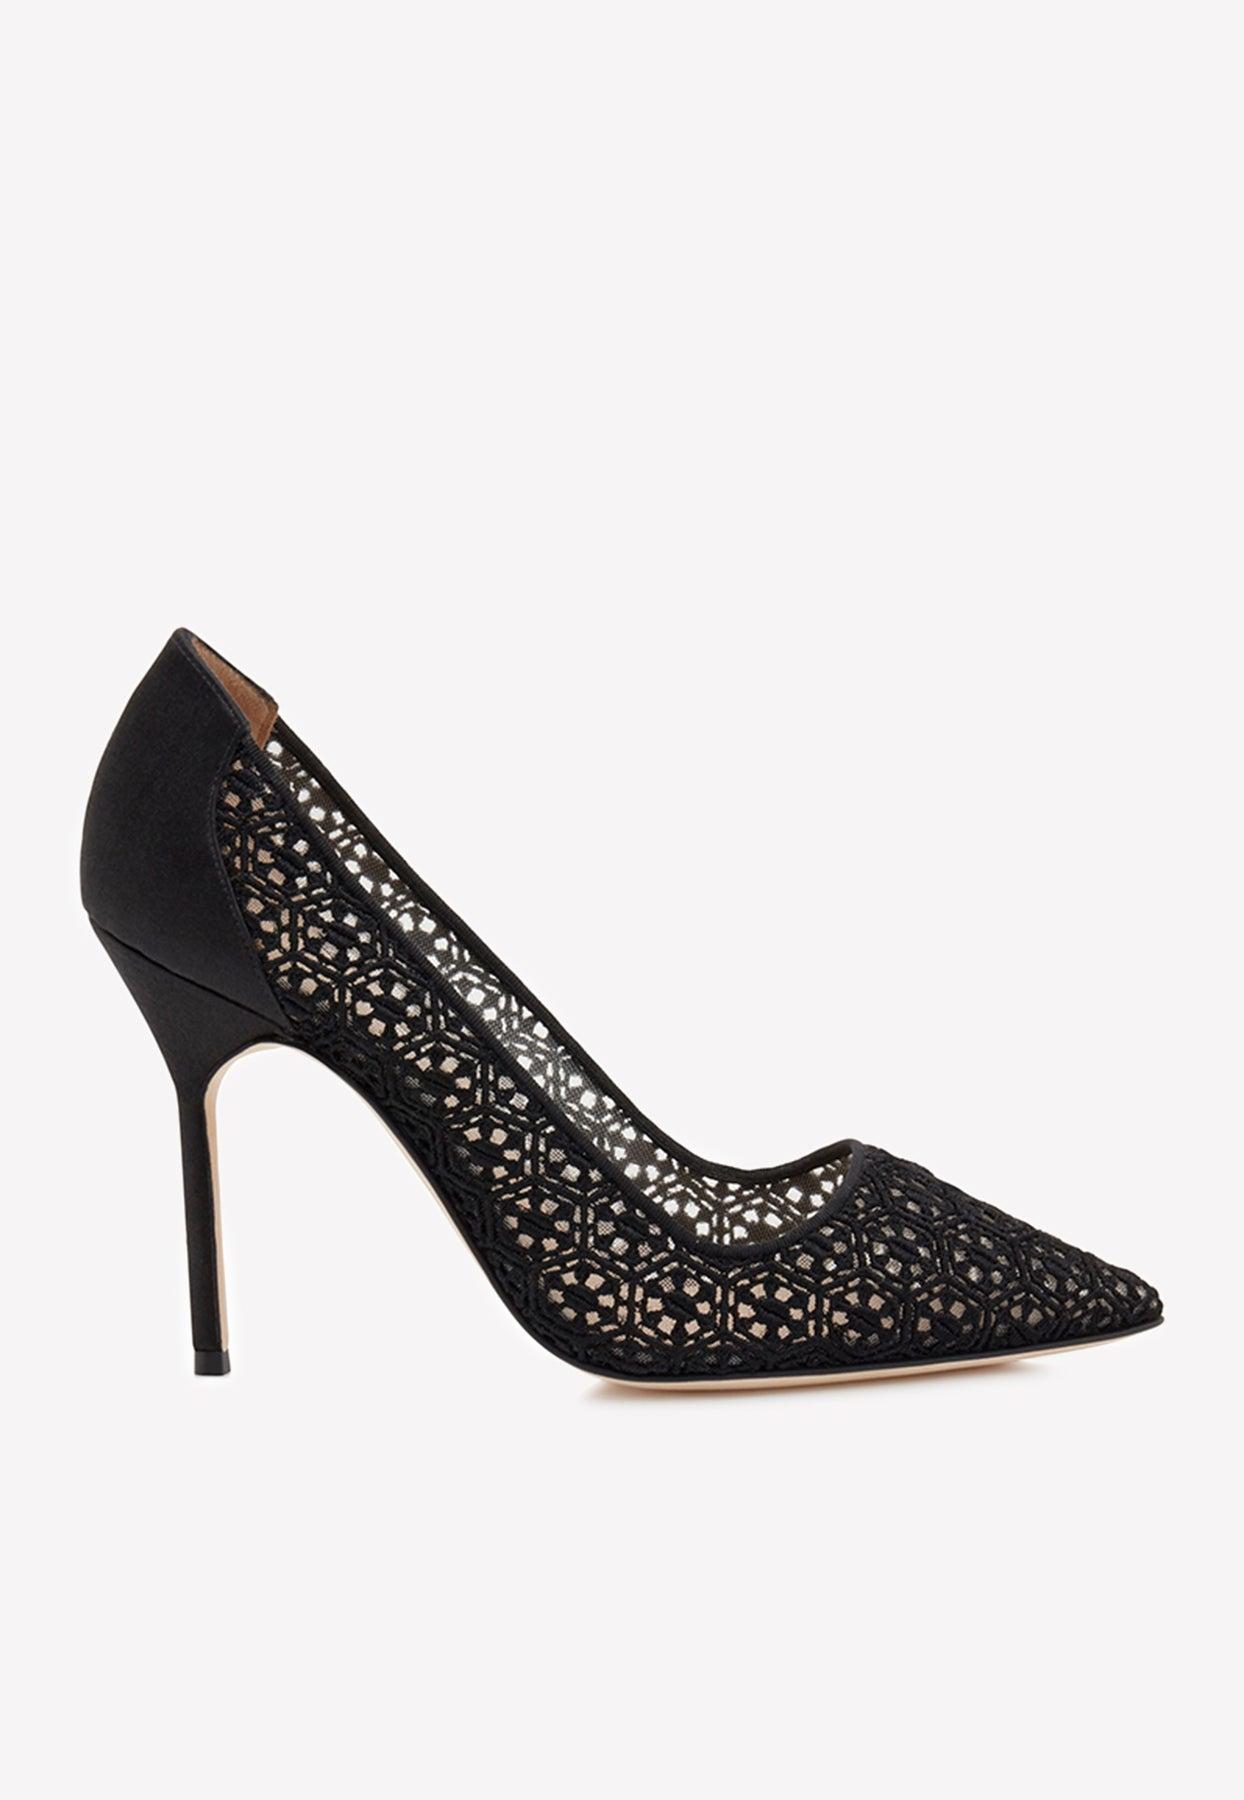 Manolo Blahnik Bbla 105 Pointed Lace Pumps in Black | Lyst